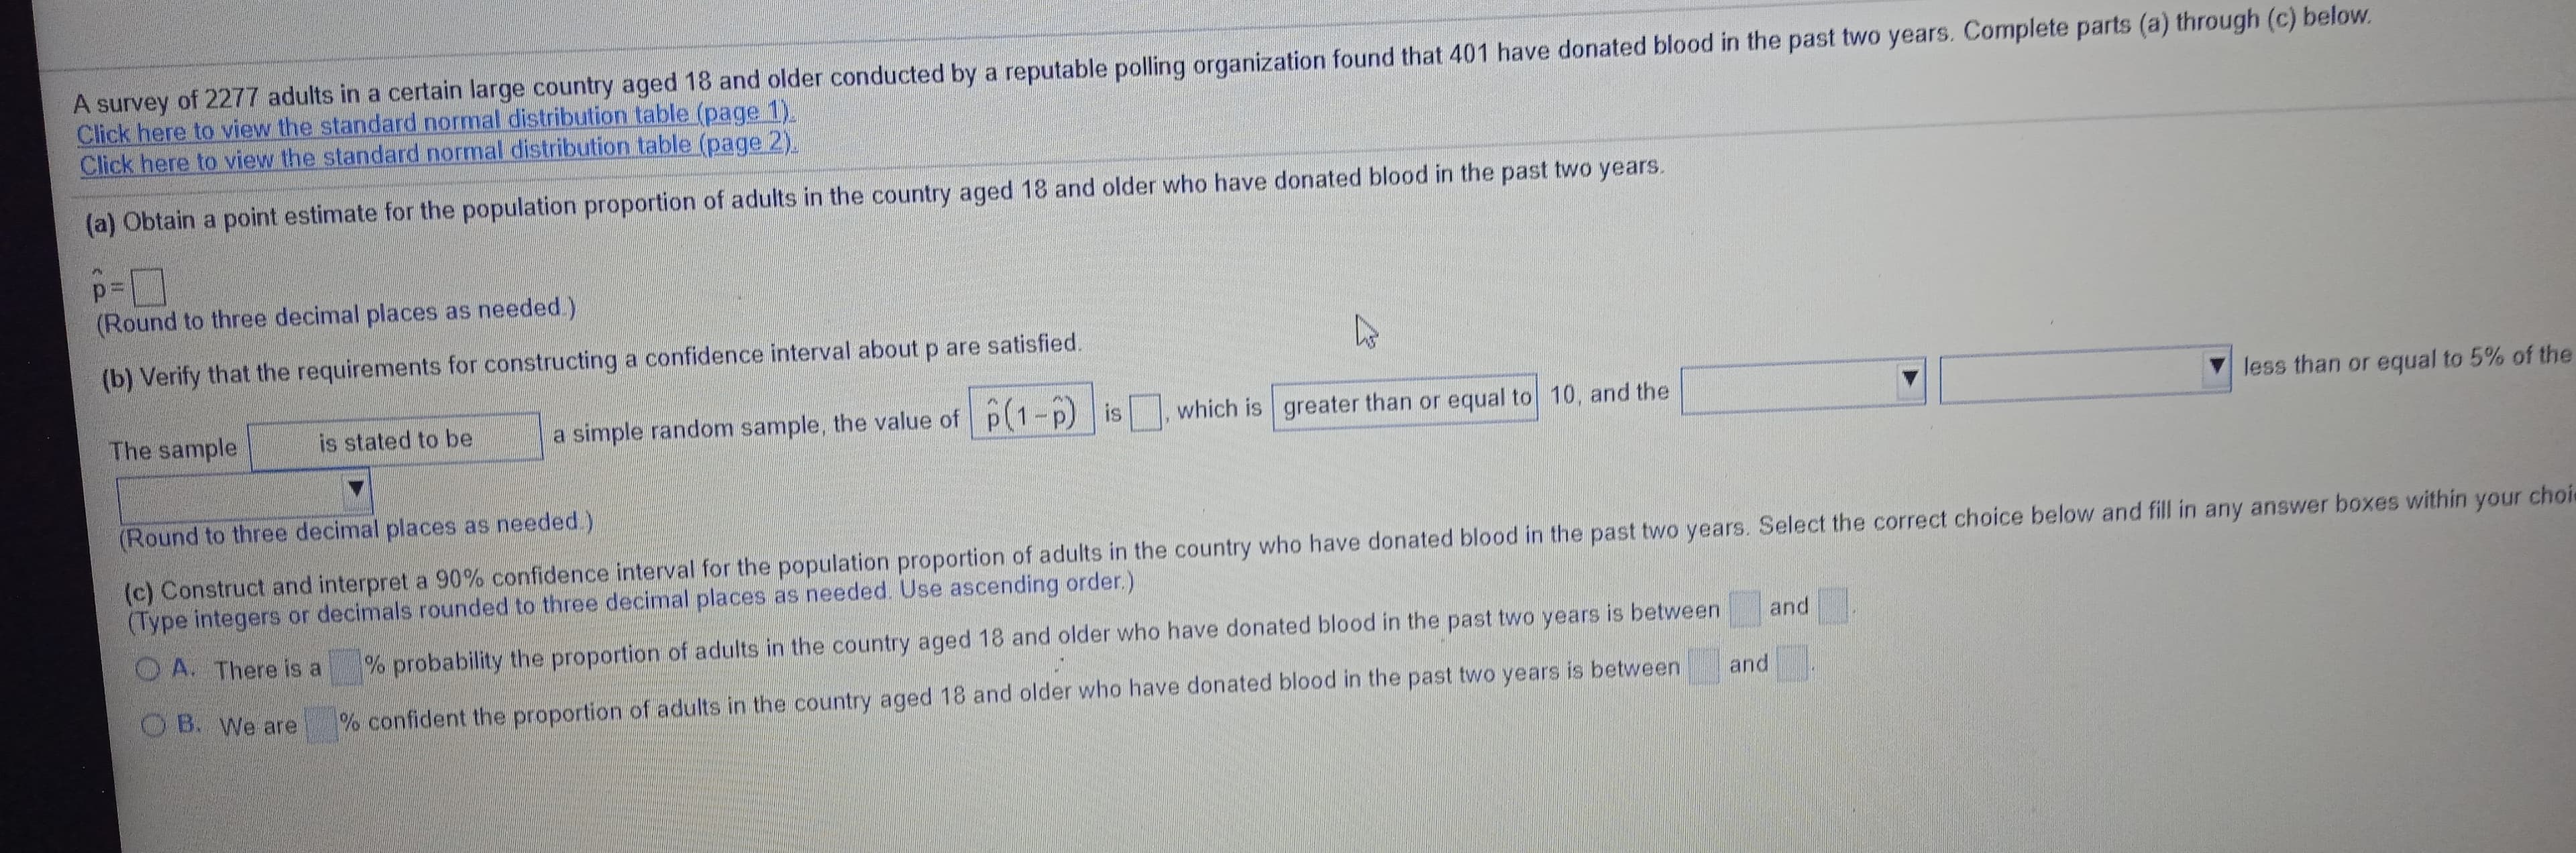 A survey of 2277 adults in a certain large country aged 18 and older conducted by a reputable polling organization found that 401 have donated blood in the past two years. Complete parts (a) through (c) below.
Click here to view the standard normal distribution table (page 1).
Click here to view the standard normal distribution table (page 2).
(a) Obtain a point estimate for the population proportion of adults in the country aged 18 and older who have donated blood in the past two years.
